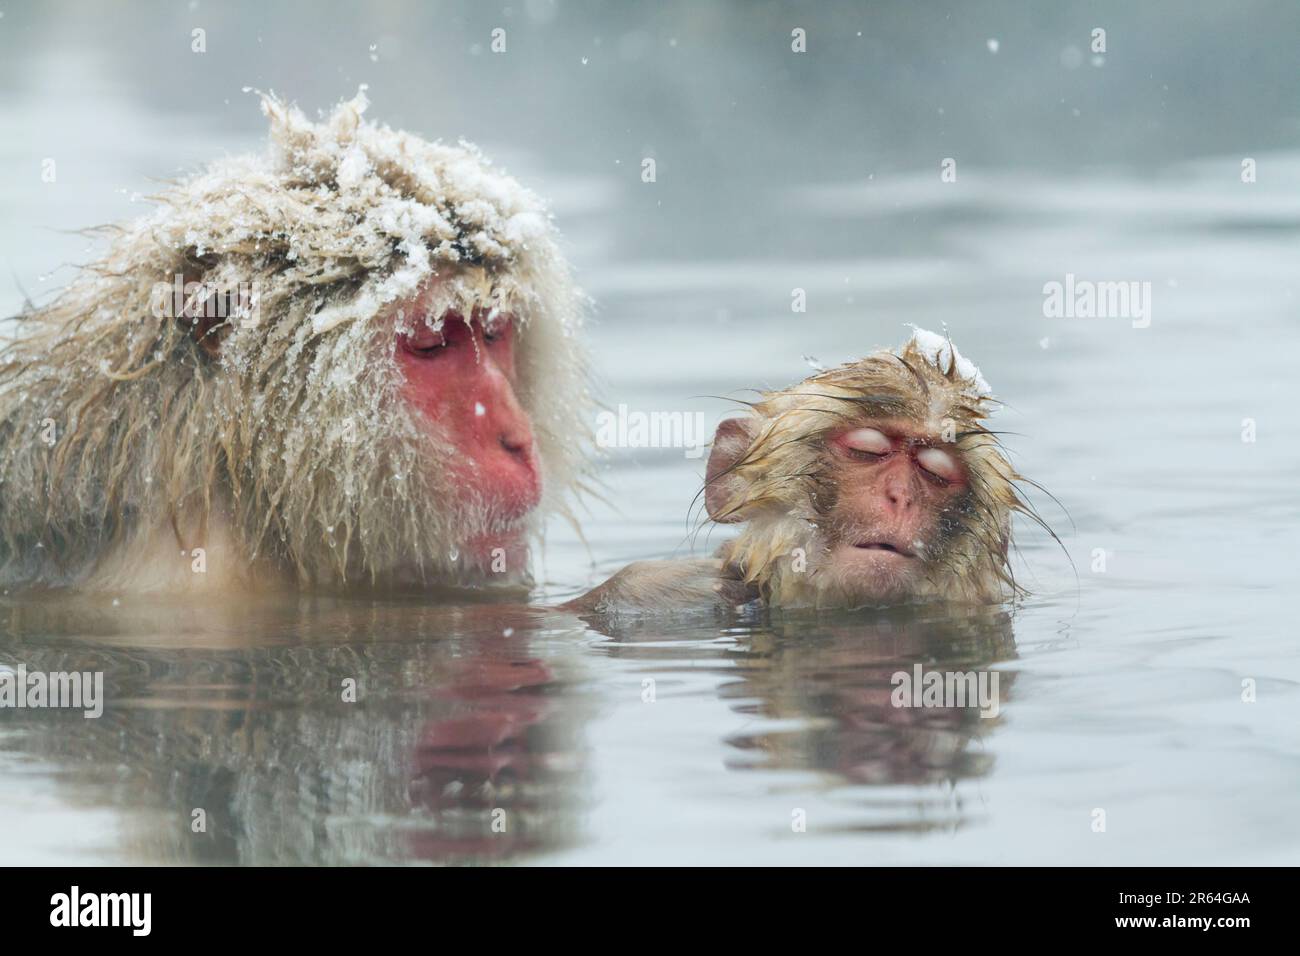 A parent and child grooming themselves in a hot spring Stock Photo